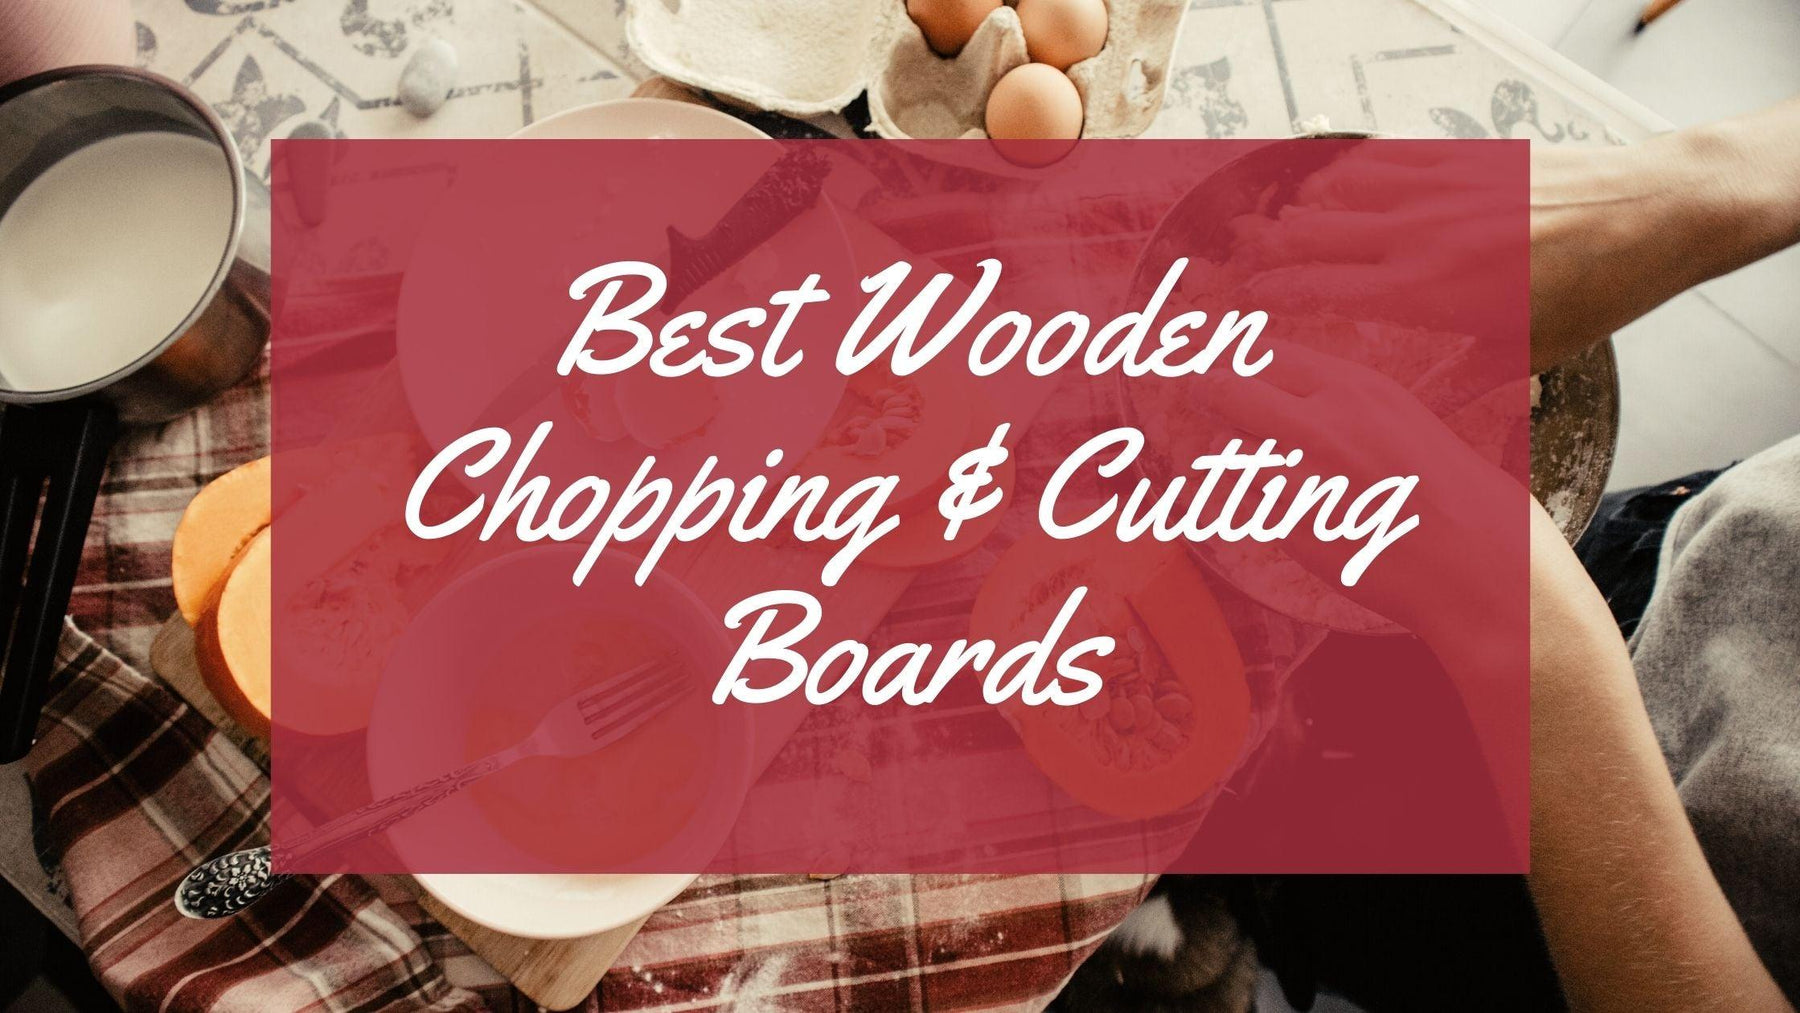 Best Wooden Chopping & Cutting Boards - WoodenTwist